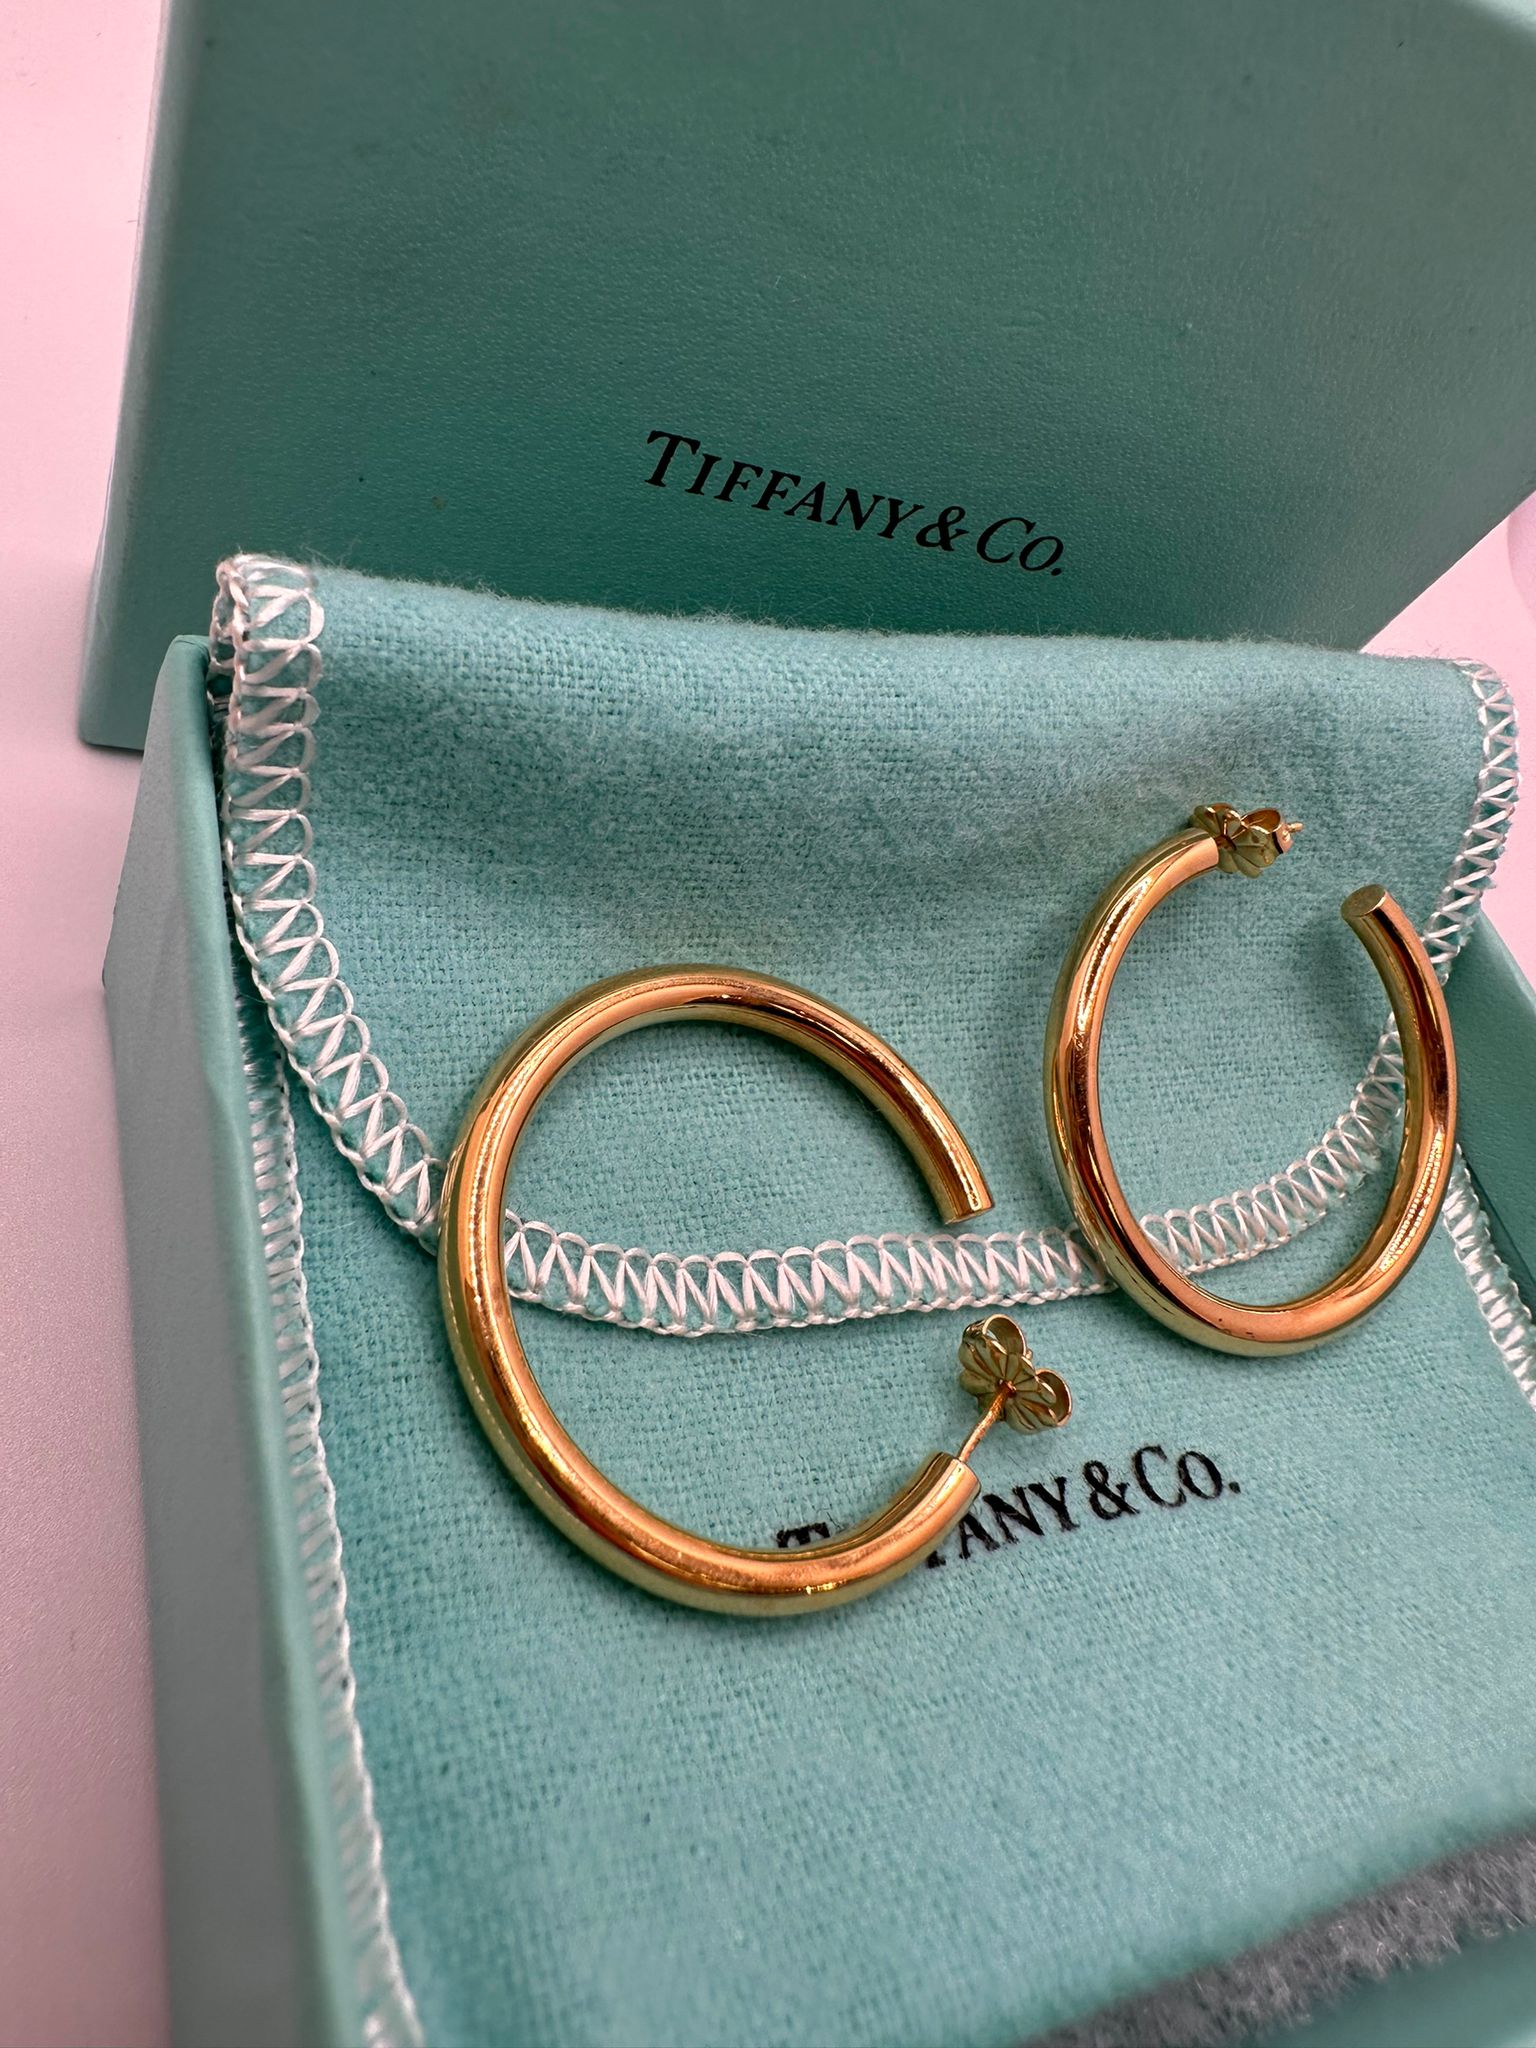 18ct gold Tiffany & Co earrings - Image 2 of 4